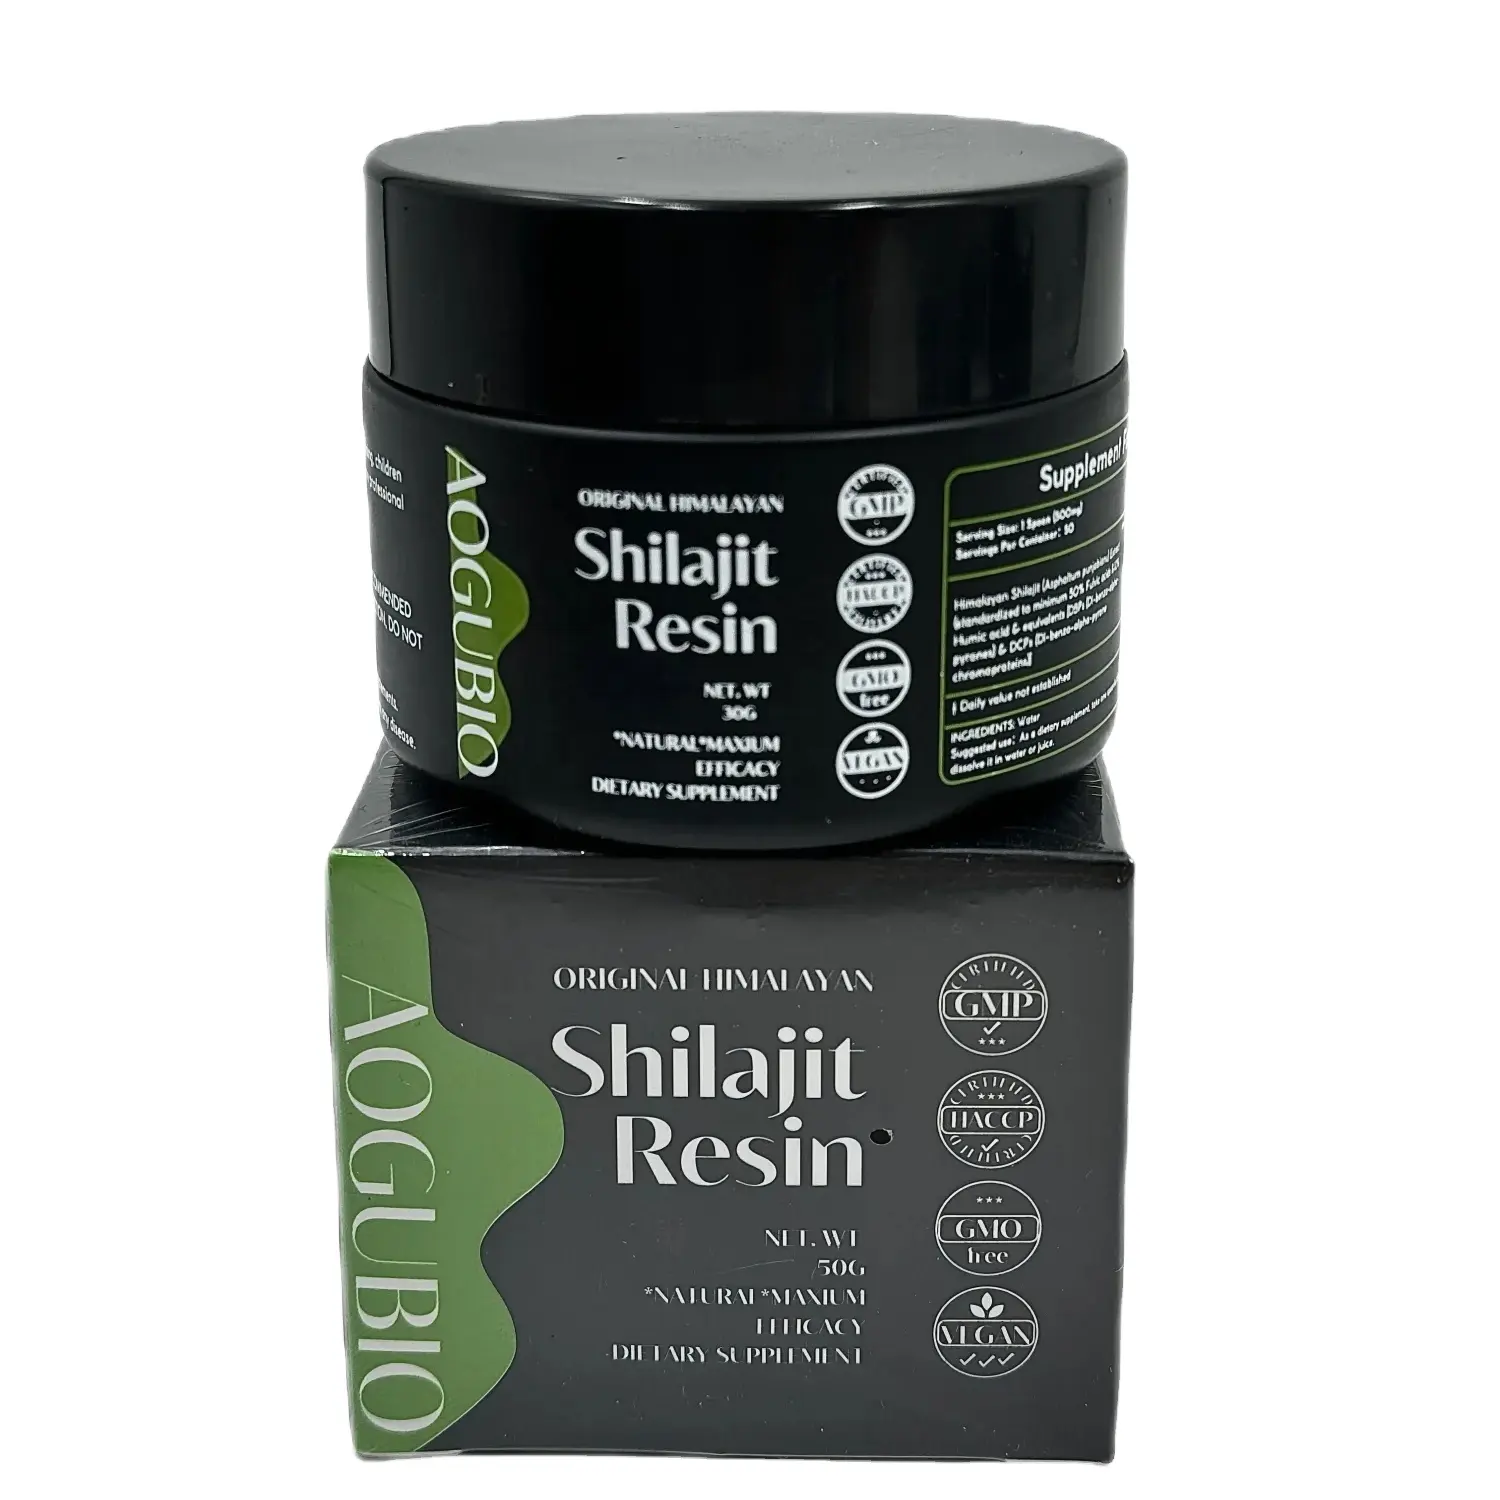 The factory offers private label Shilajit Resin to feel the power of Shilajit and explore the essence of Himalayan herbs